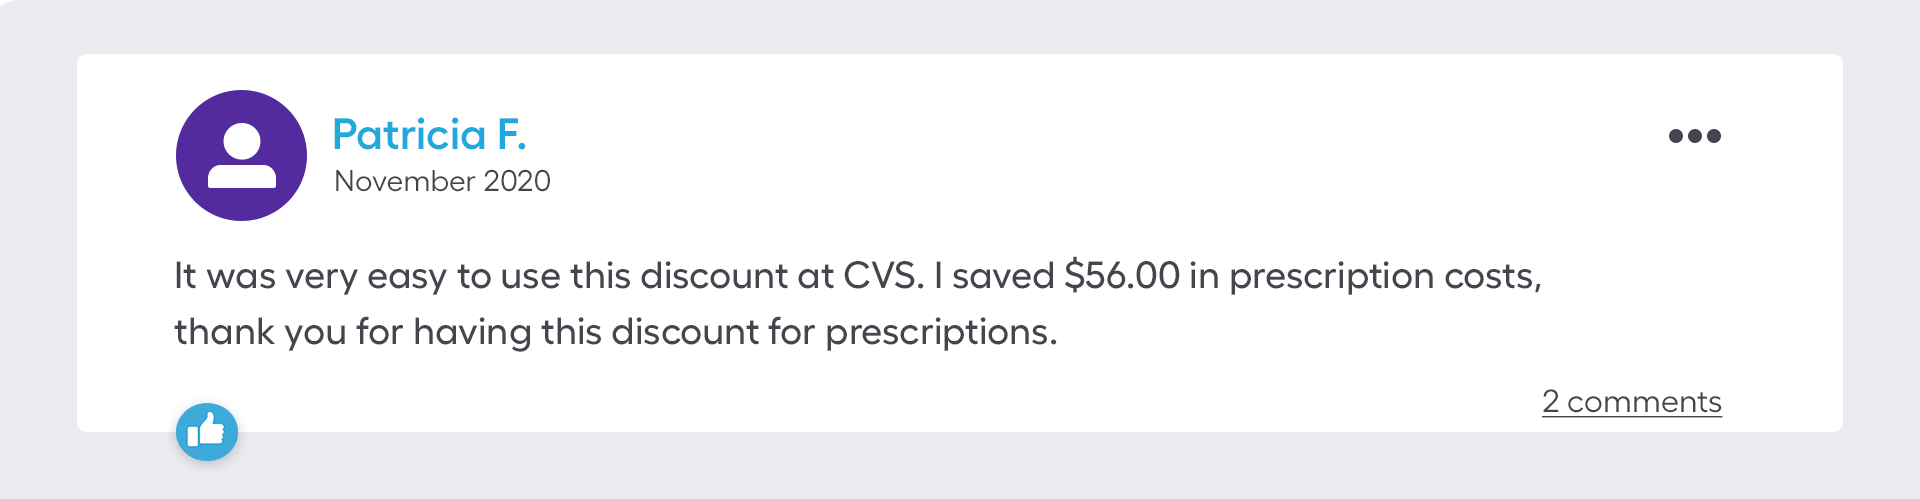 It was very easy to use this discount at CVS. I saved $56.00 in prescription costs, thank you for having this discount for prescriptions.